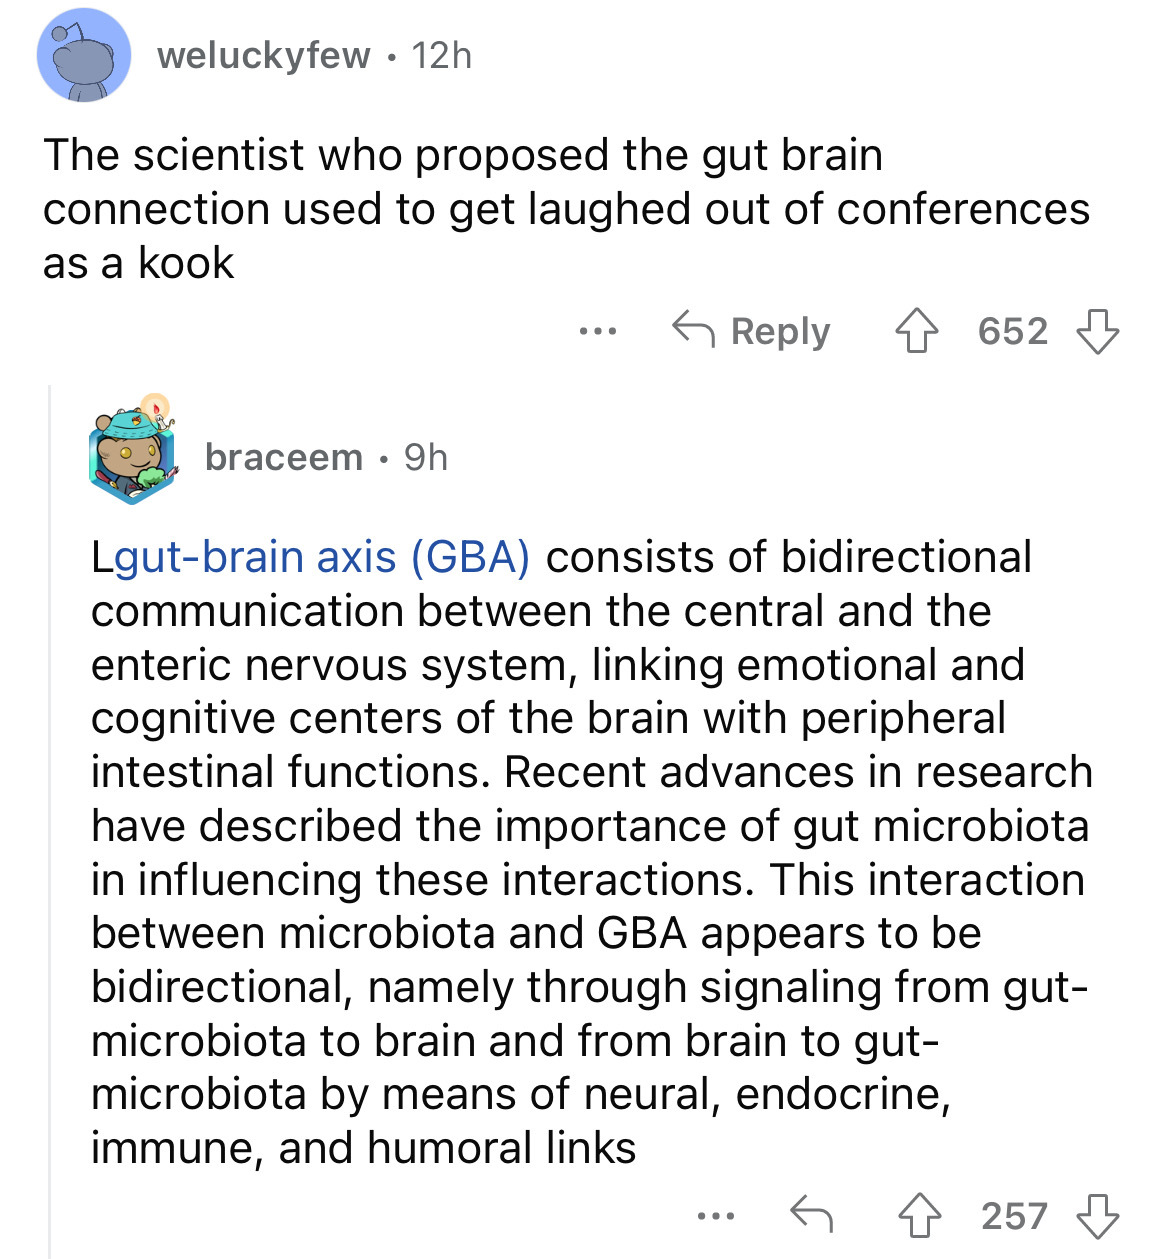 document - weluckyfew. 12h The scientist who proposed the gut brain connection used to get laughed out of conferences as a kook 4652 braceem 9h ... Lgutbrain axis Gba consists of bidirectional communication between the central and the enteric nervous syst